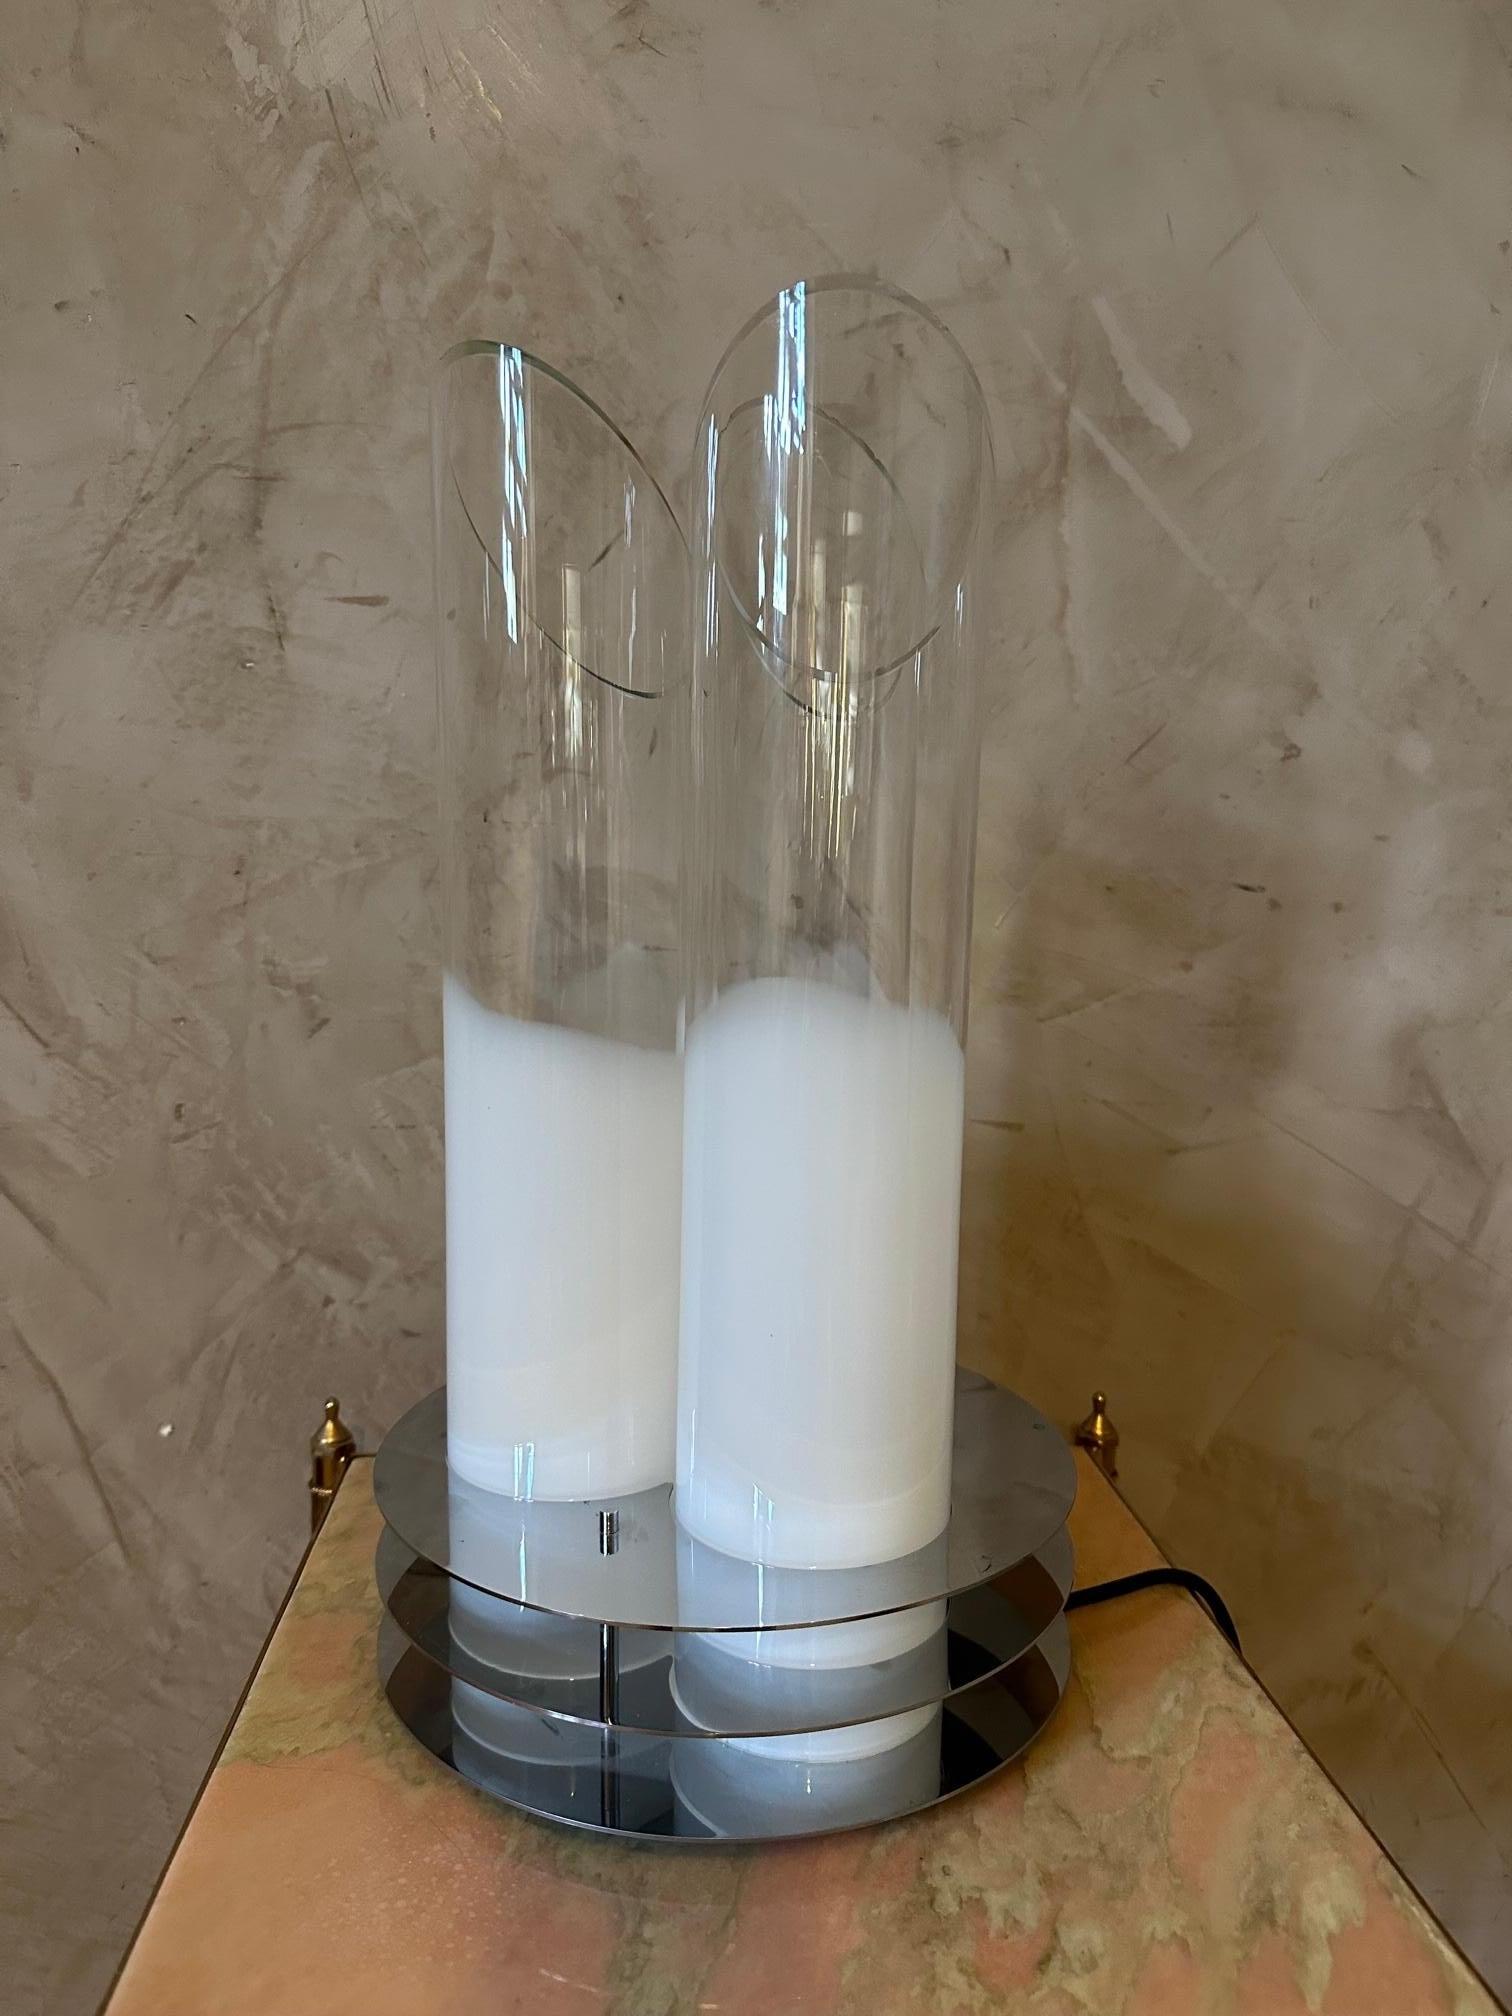 Very beautiful lamp by the famous designer Carlo Nason from the 70s in Murano glass. Three semi-transparent and opaque tubular glasses with chromed metal structure.
Electrical outlet with dimmer.
Superb quality and rare model. The glasses are a bit